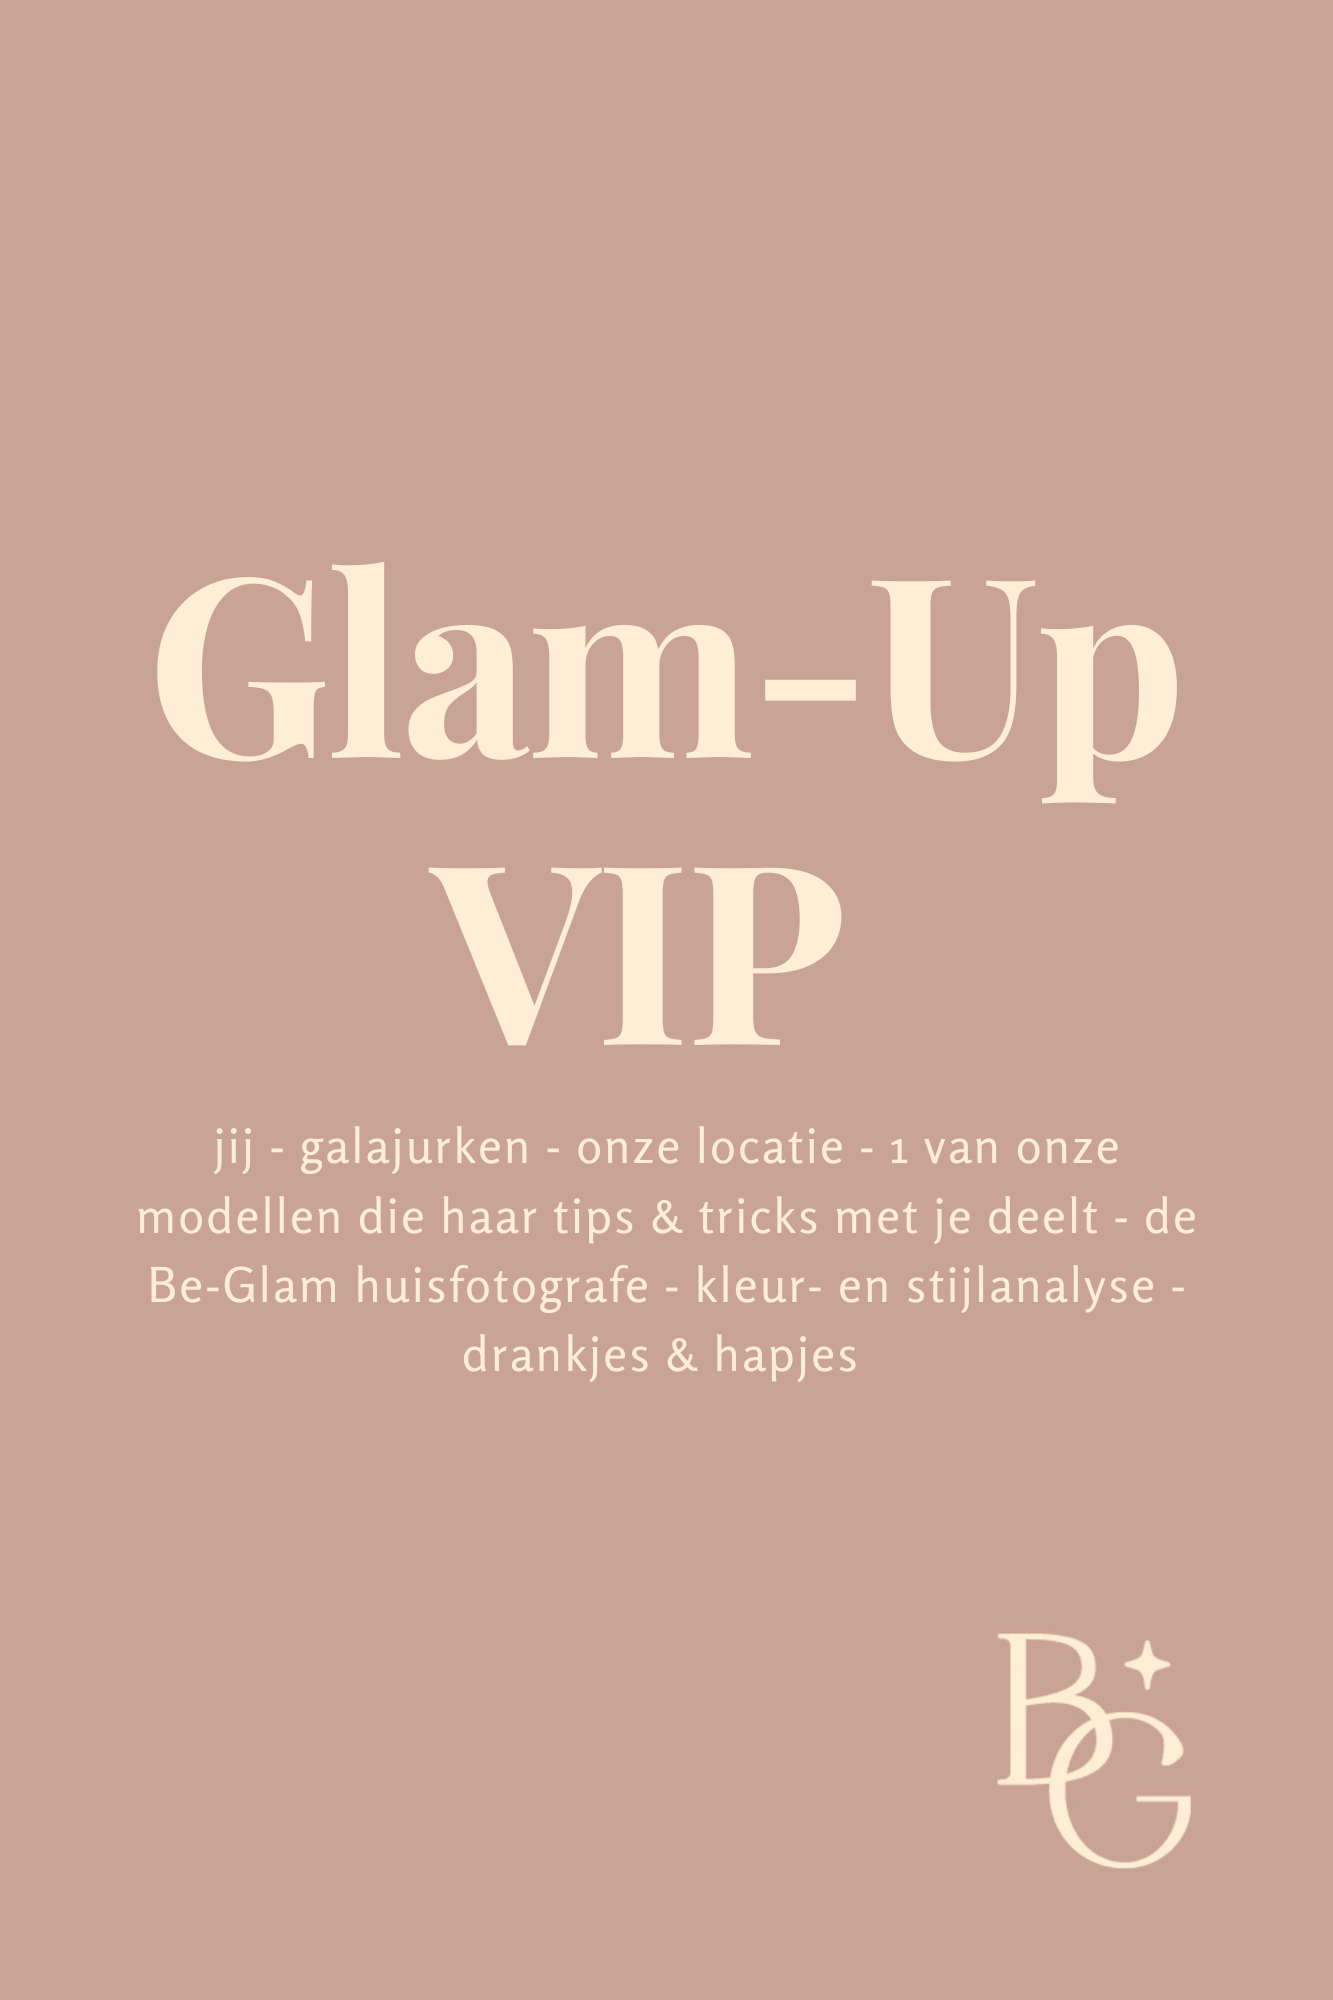 Glam-Up VIP Formule